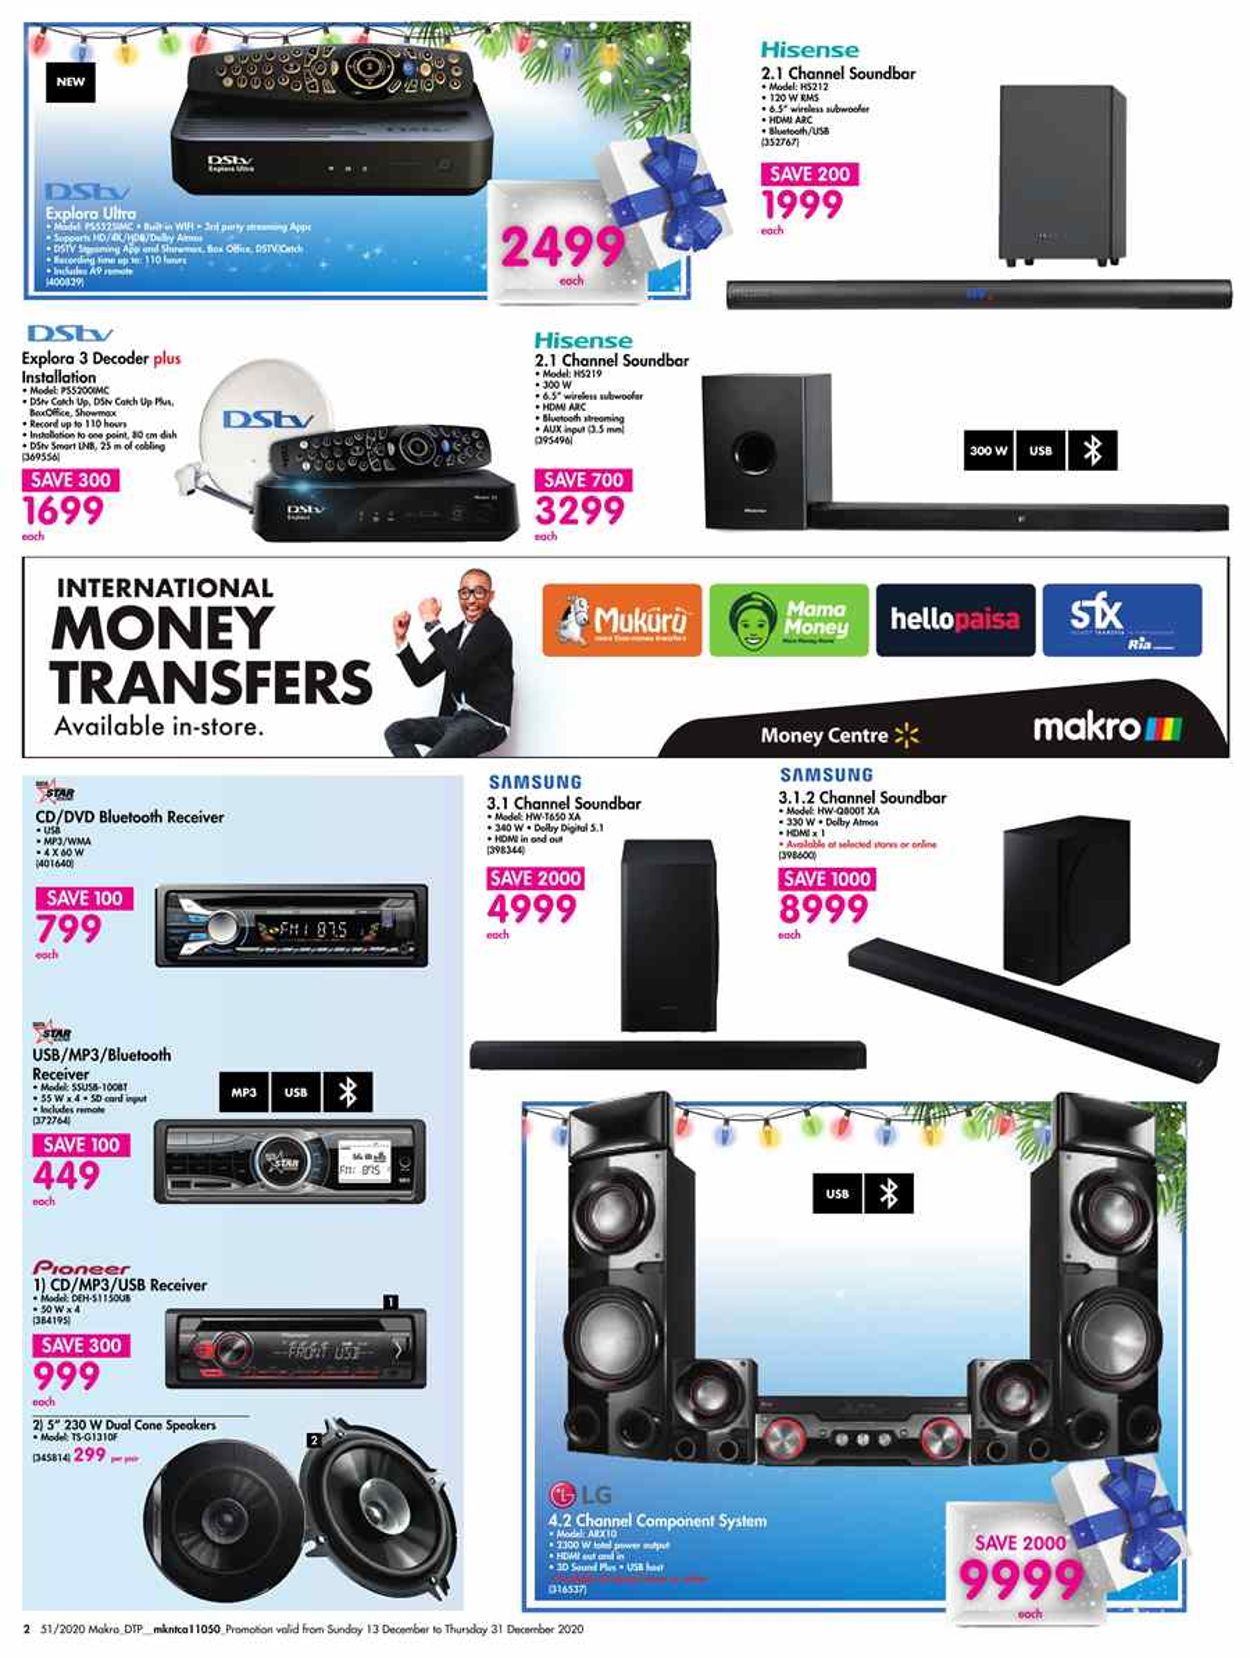 Makro Catalogue from 2020/12/13